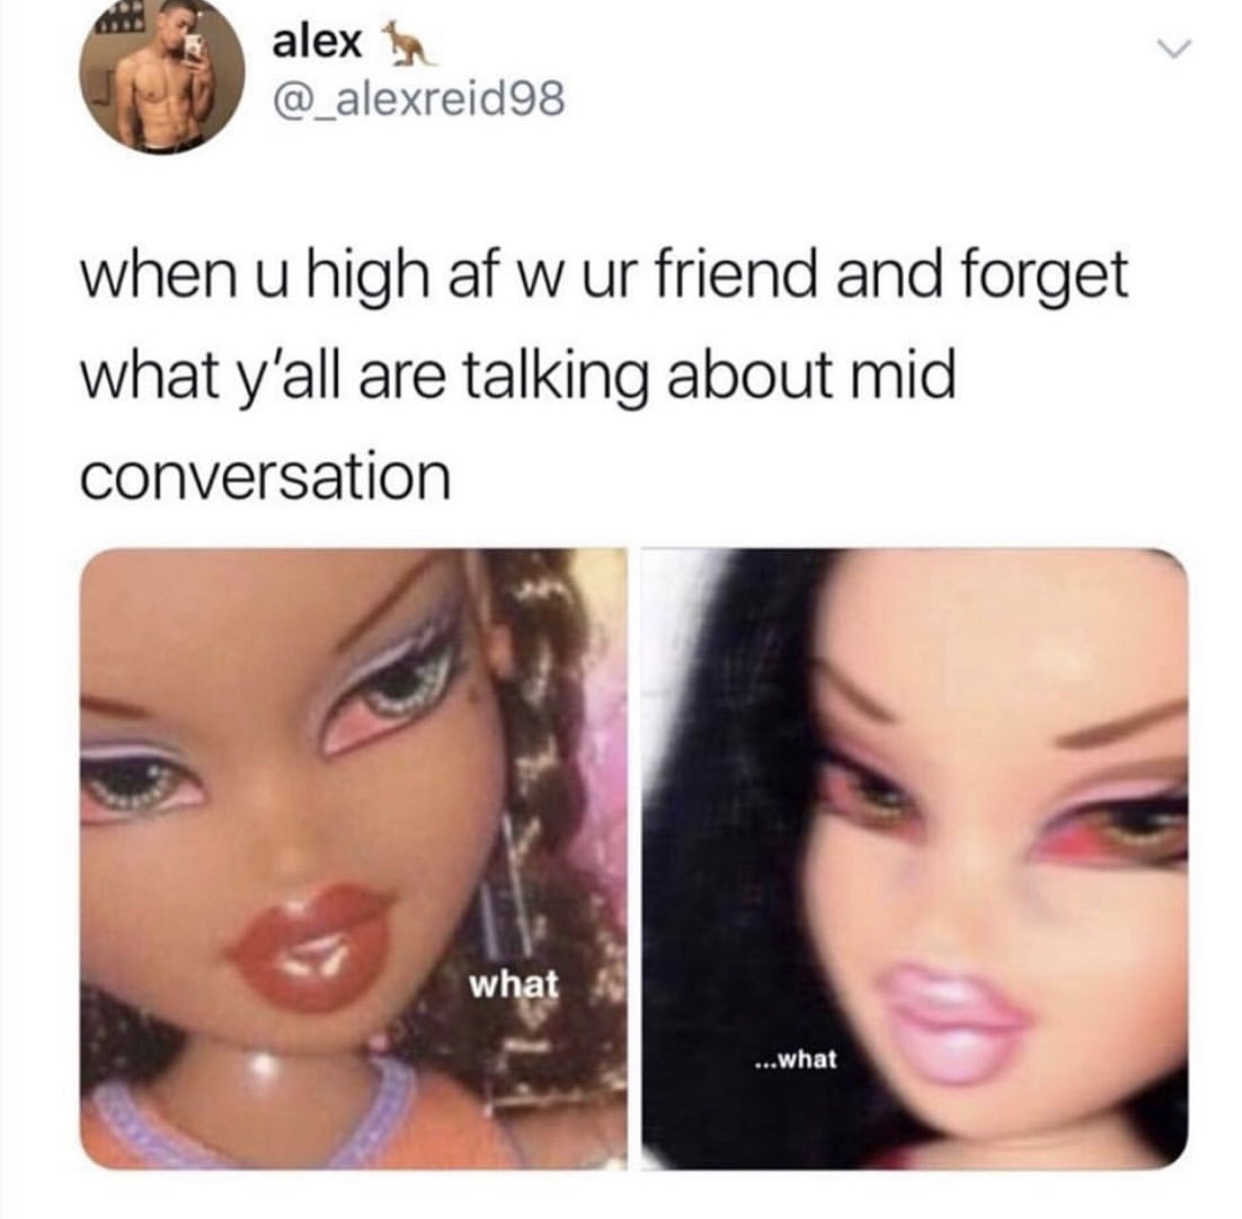 do i look high nah do i nah - alex when u high af w ur friend and forget what y'all are talking about mid conversation what ...what